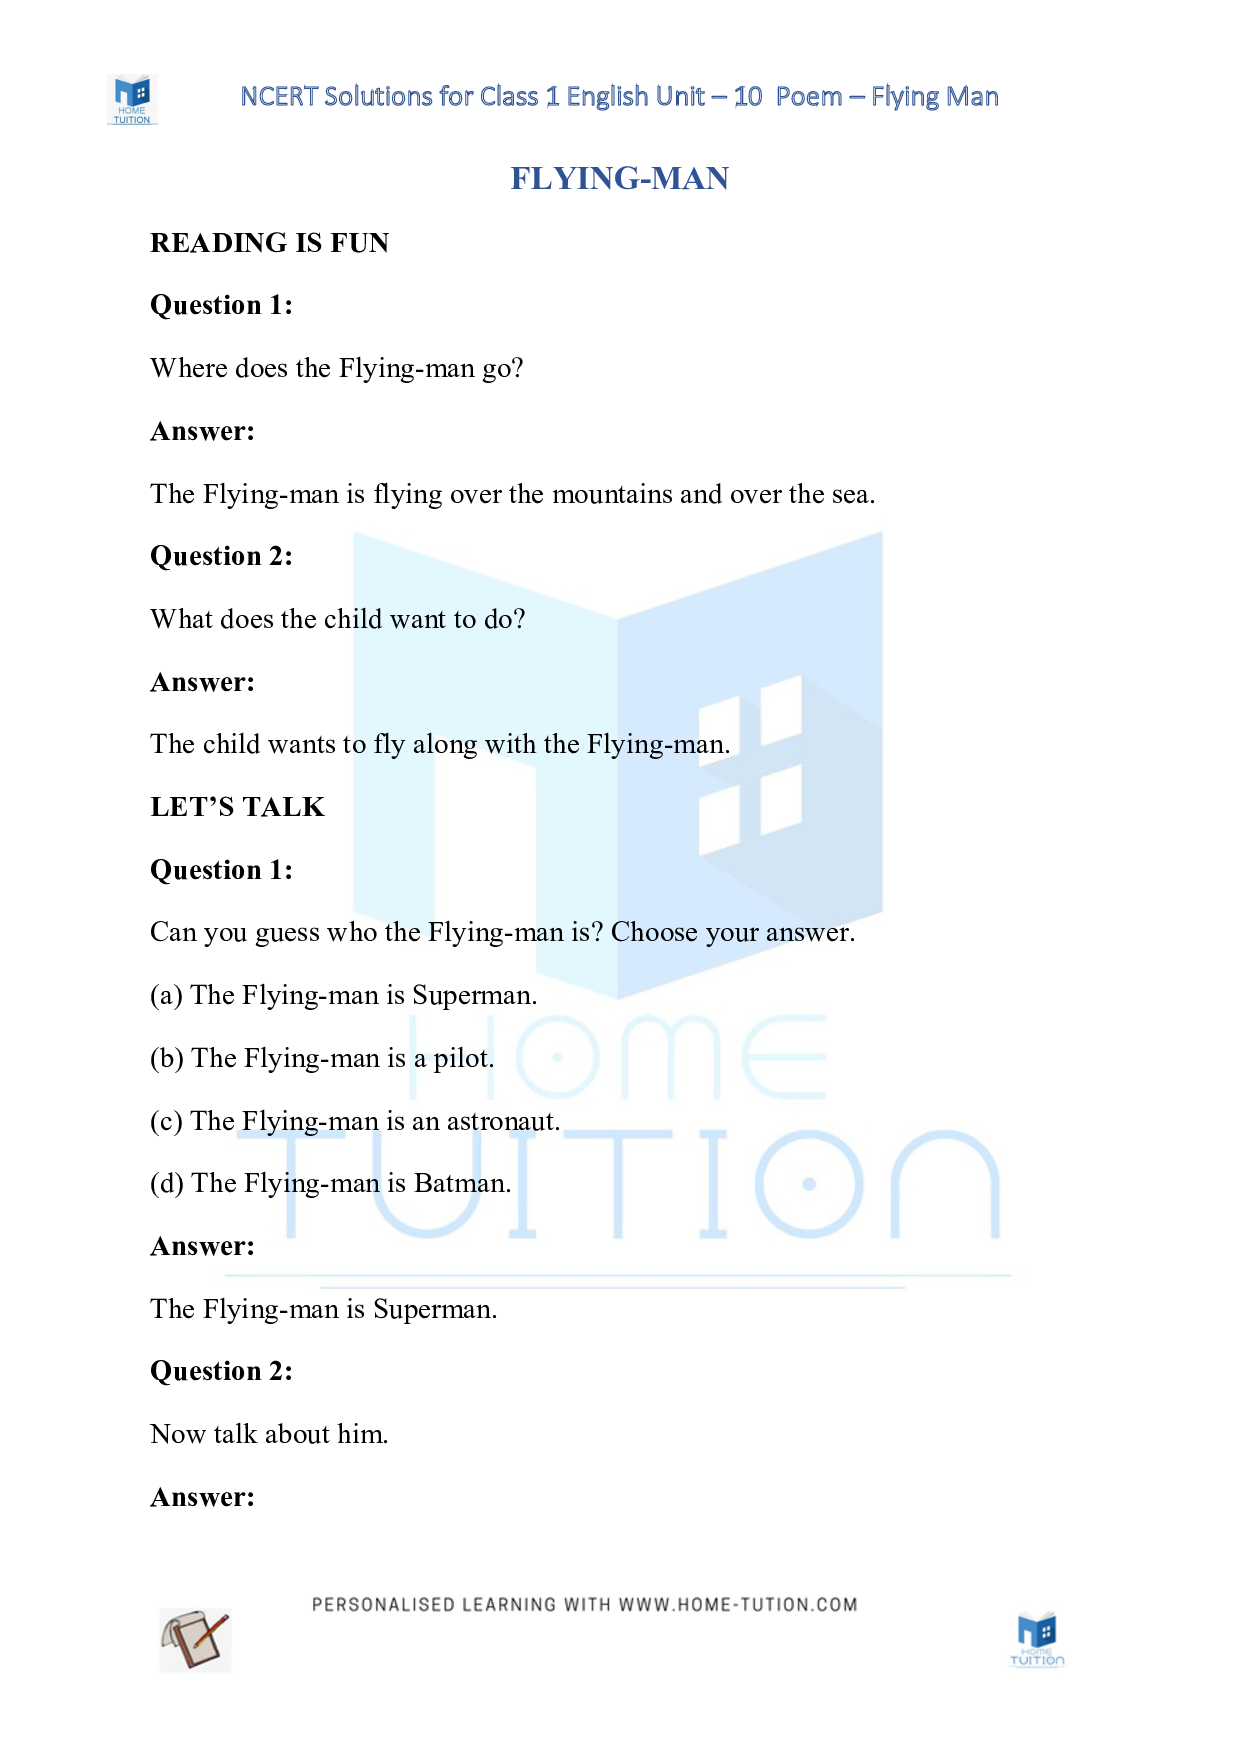 NCERT Solutions for Class 1 English Unit 10 Poem - Flying Man